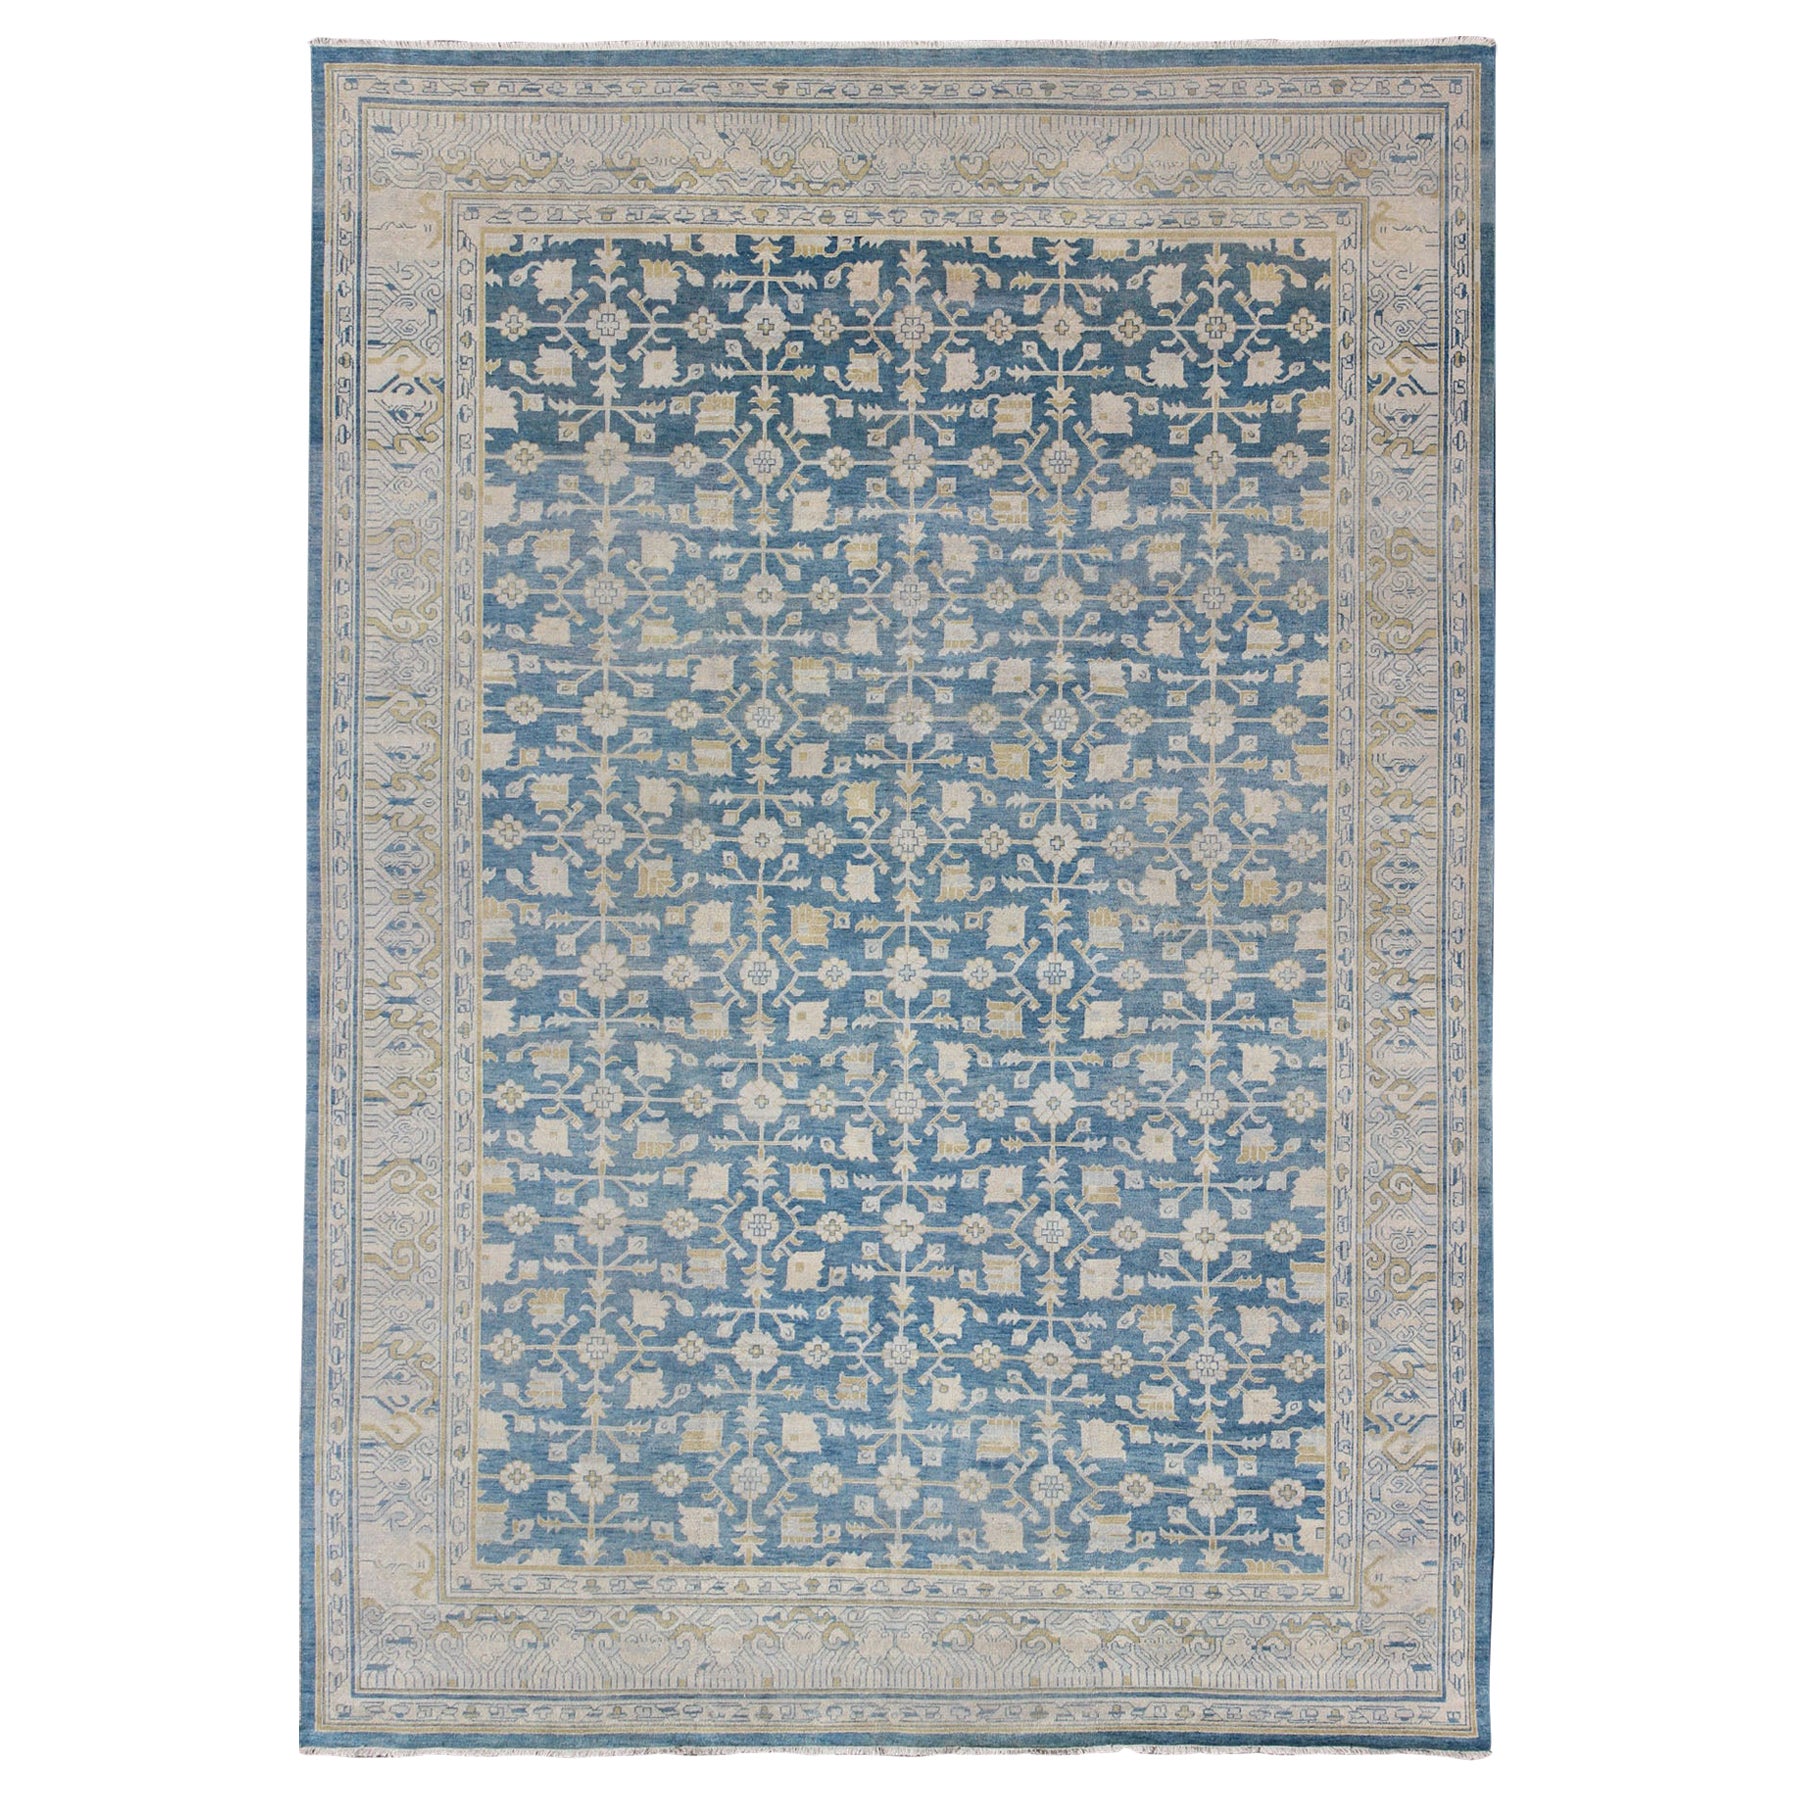 Khotan Design Rug with All-Over Sub-Geometric Pattern in Blue, Tan & Gold For Sale